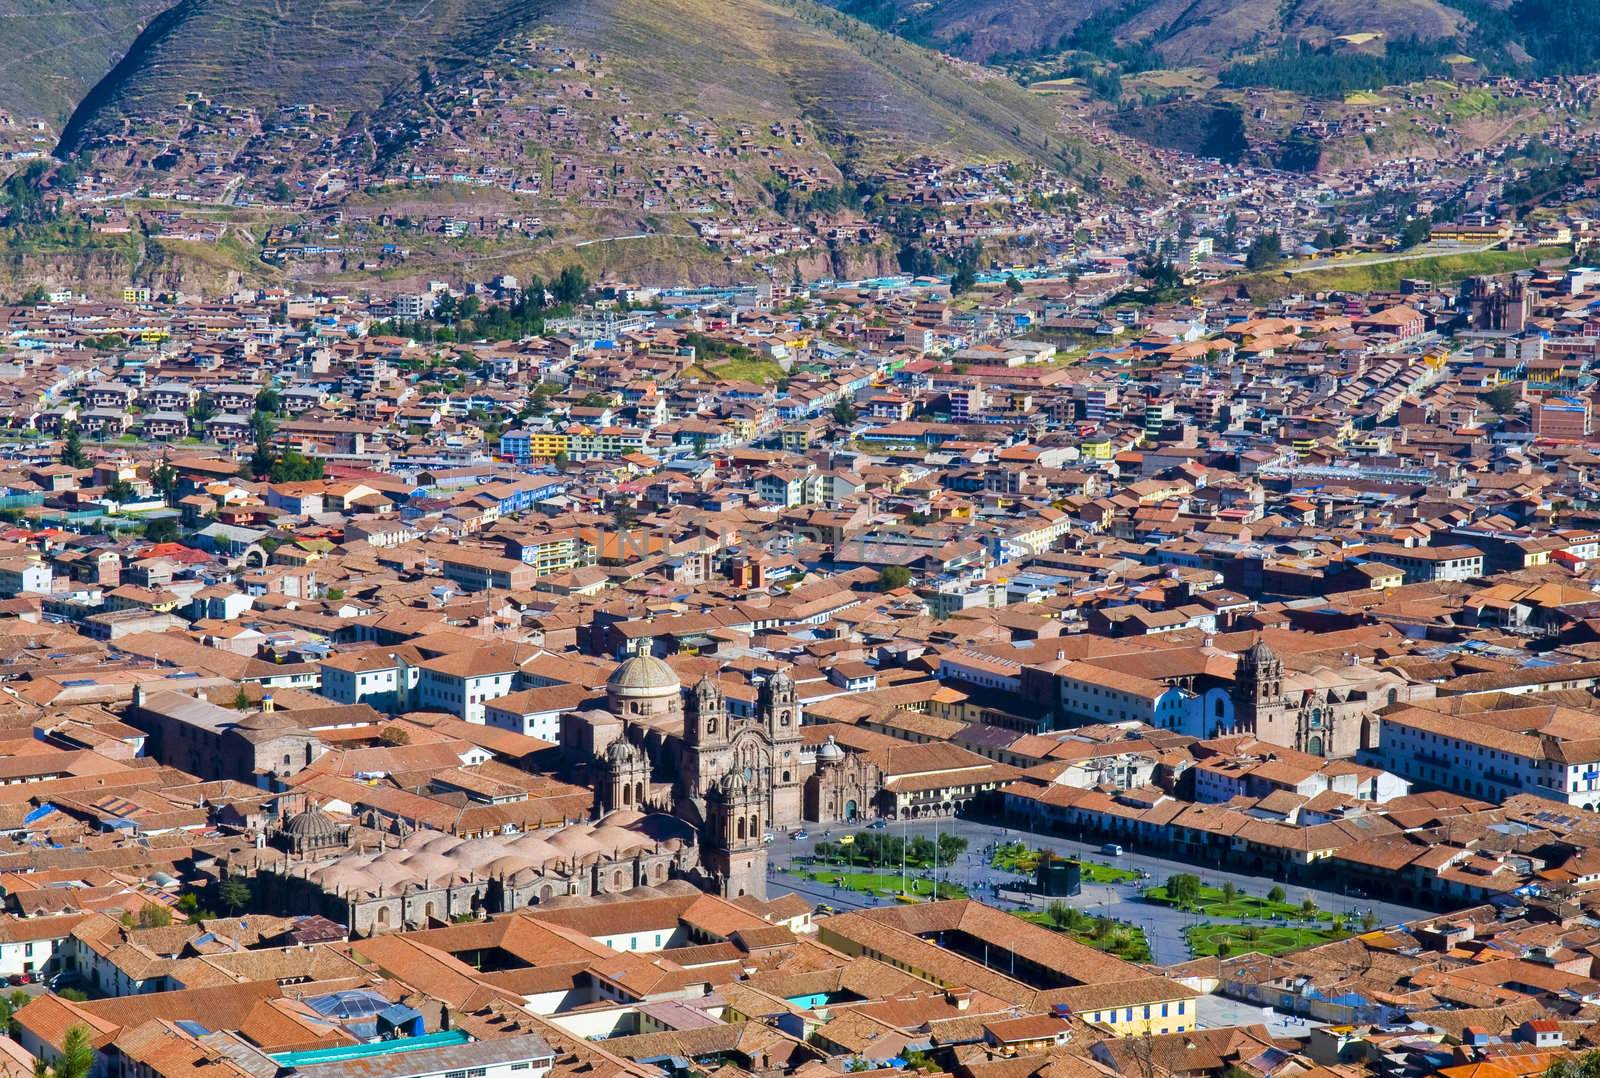 View of the Peruvian city of Cusco the former capital of the Incan empire and "unesco" world heritage site